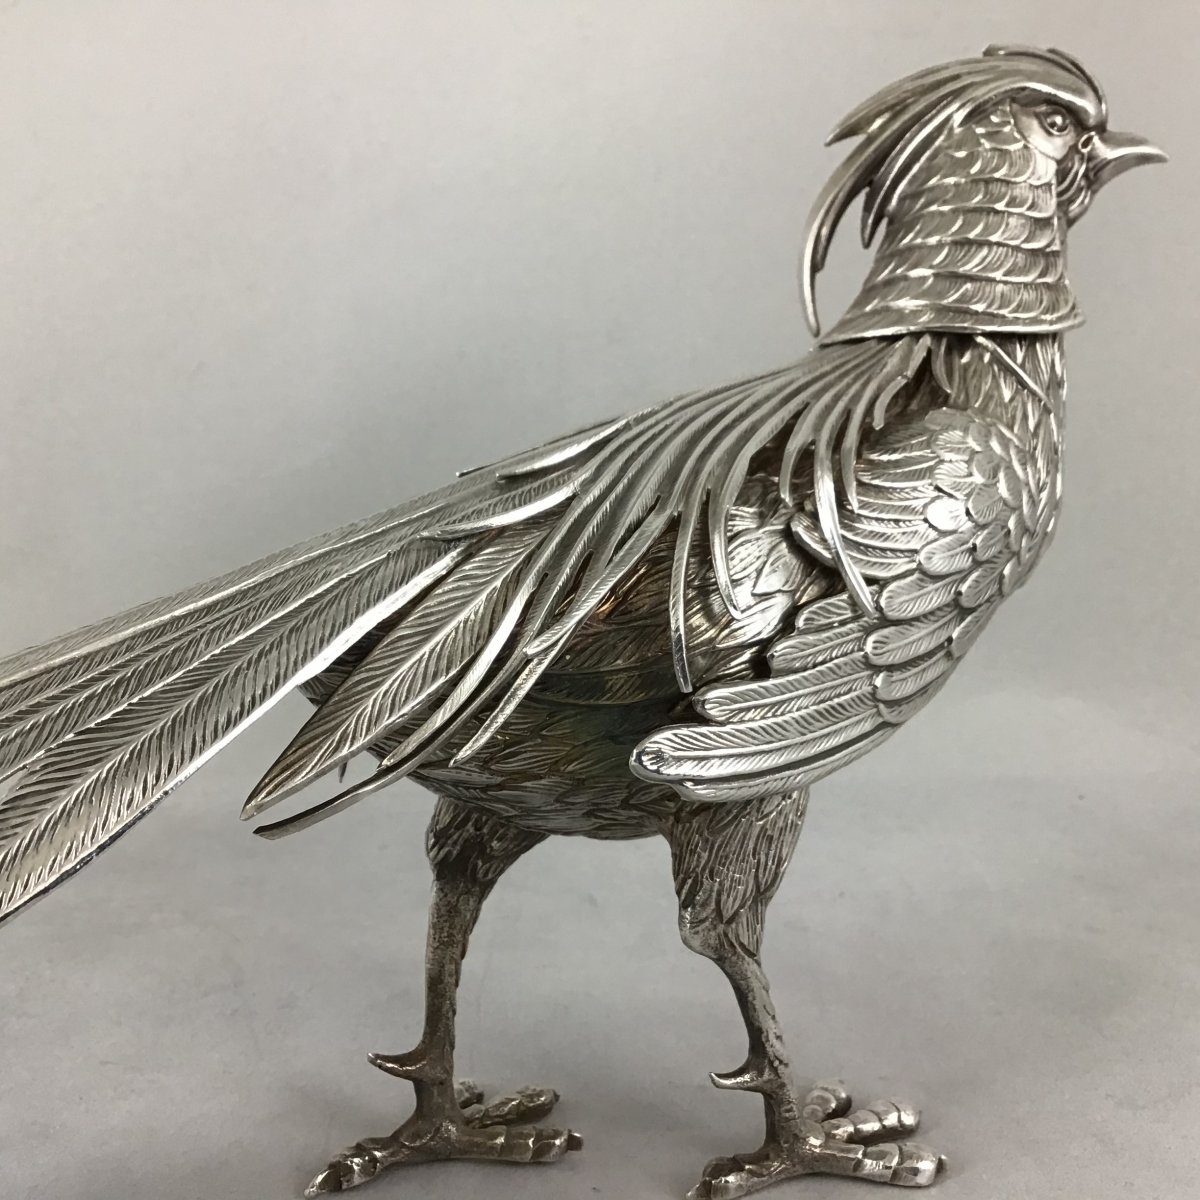 Pheasant In Sterling Silver, Spain Around 1960, Silver 916 \\%,-photo-1